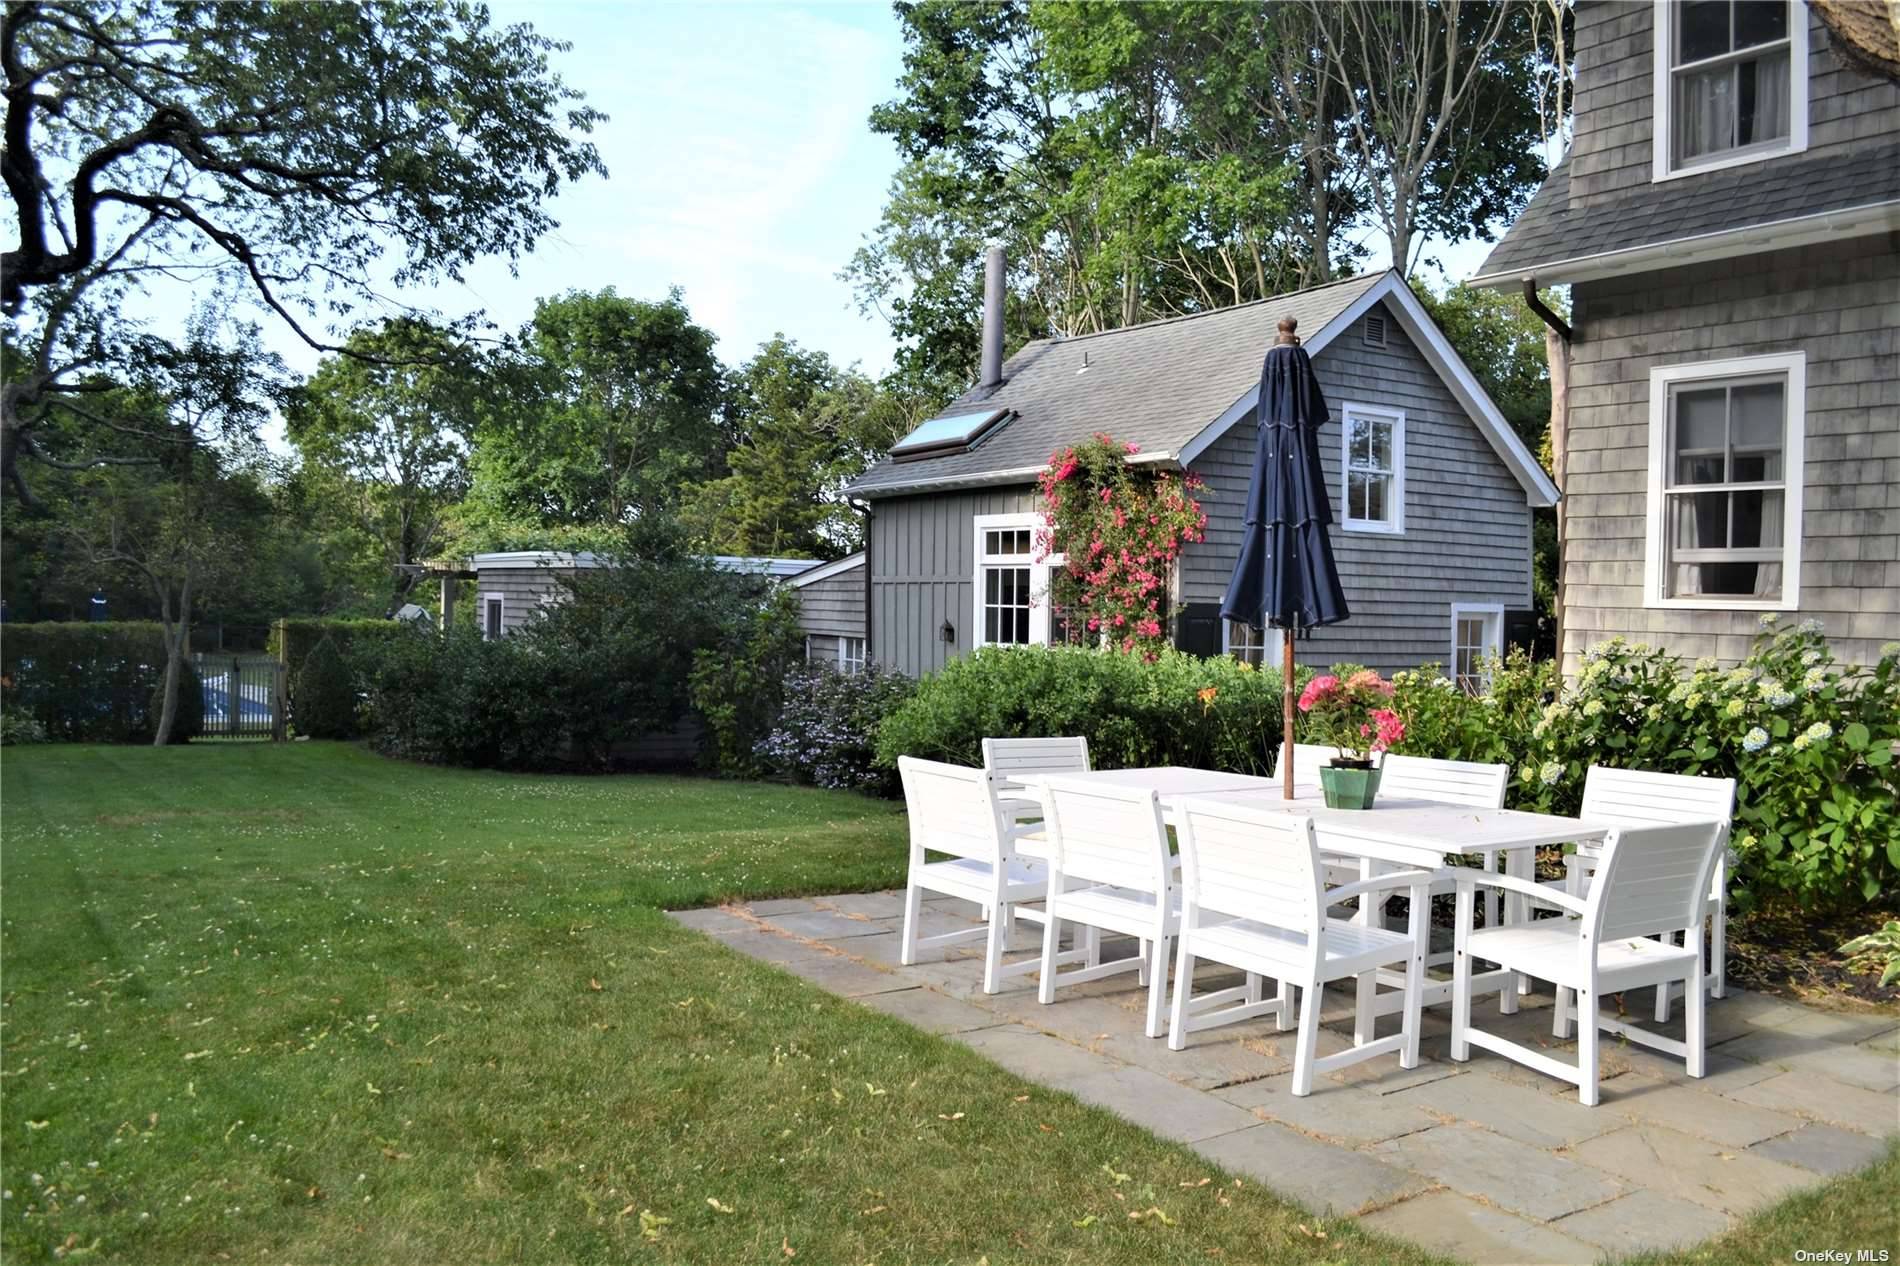 Enjoy your summer in this fabulous Water Mill compound close to the village and beaches.